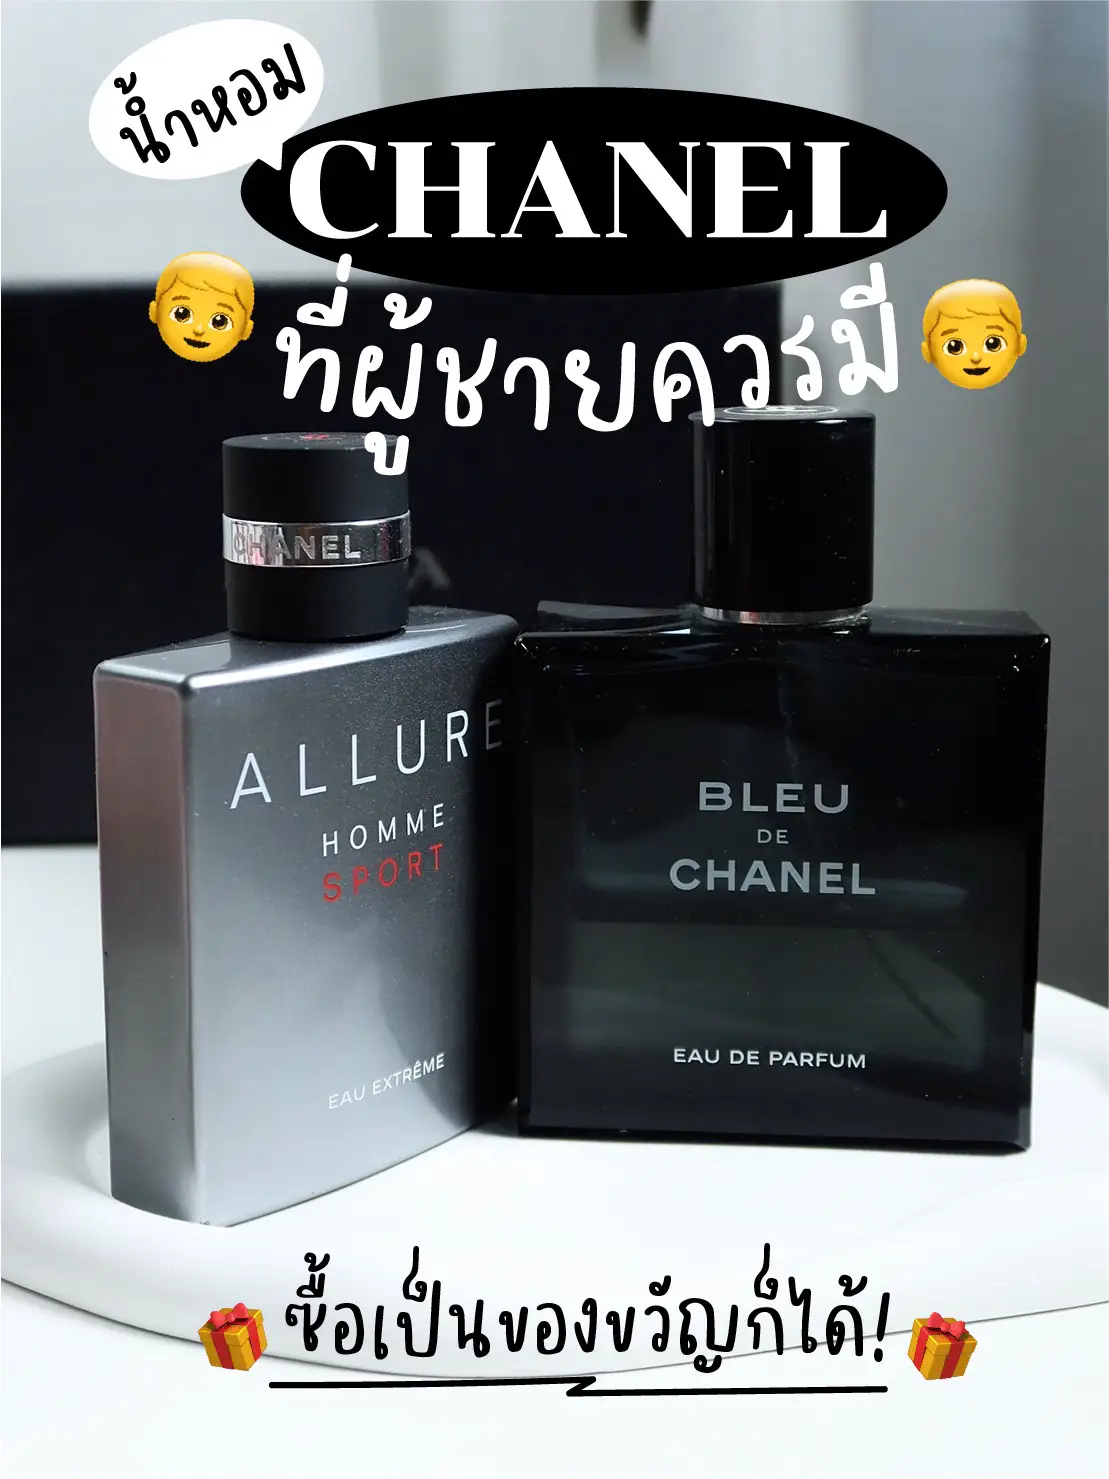 CHANEL perfume that men should have 🖤✨, Gallery posted by toonmett